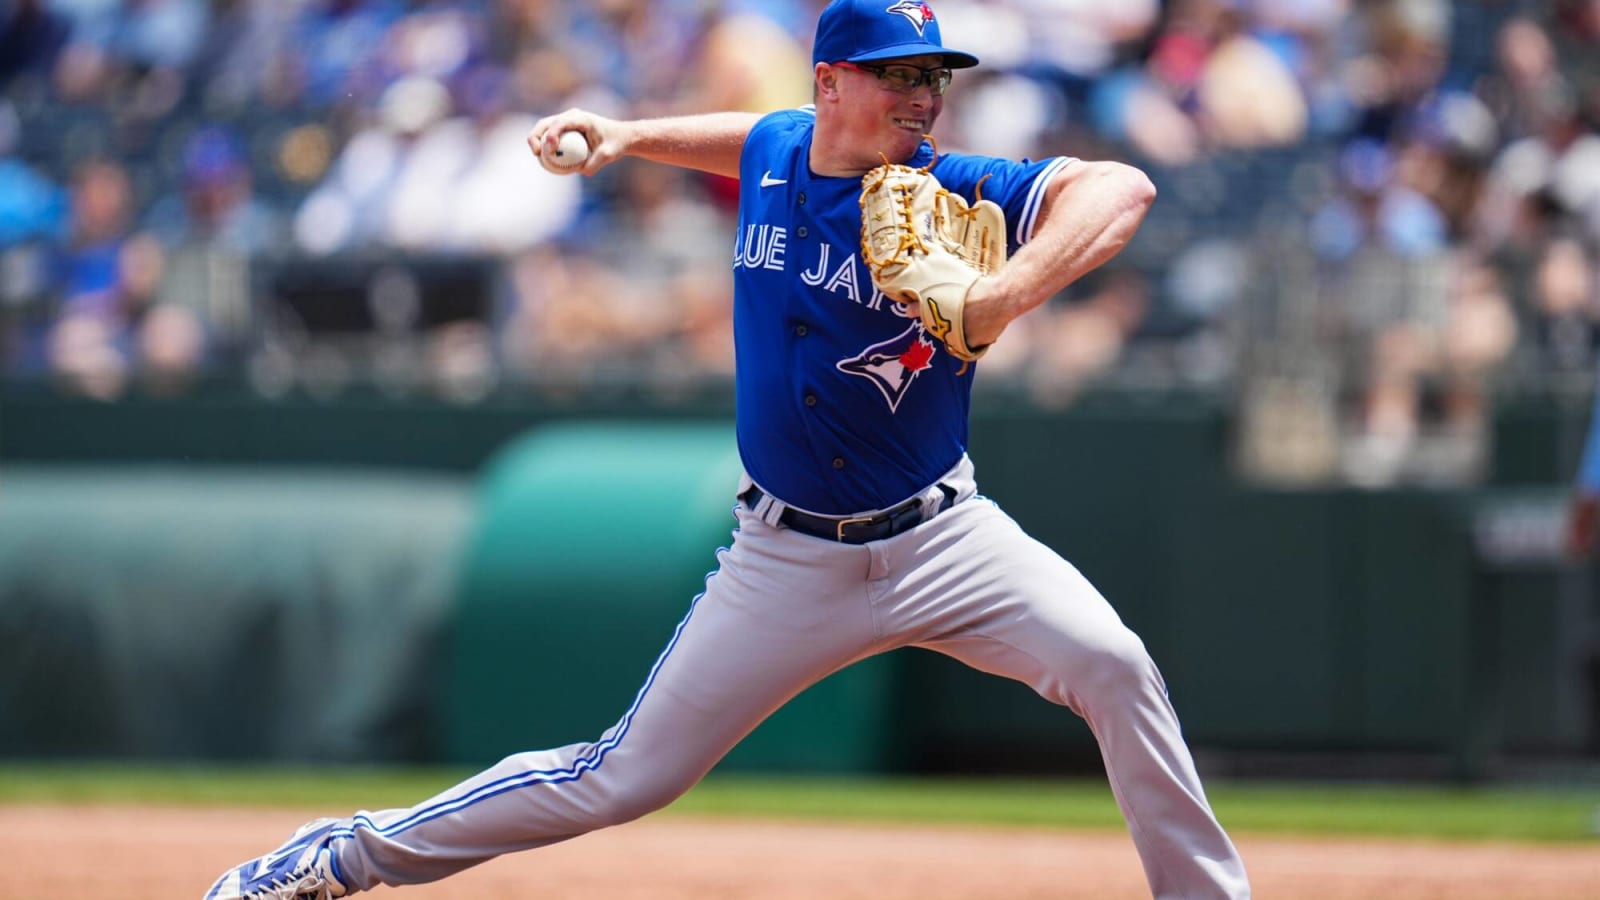 The Blue Jays trade 2019 innings leader Trent Thornton to the Seattle Mariners for infielder Mason McCoy